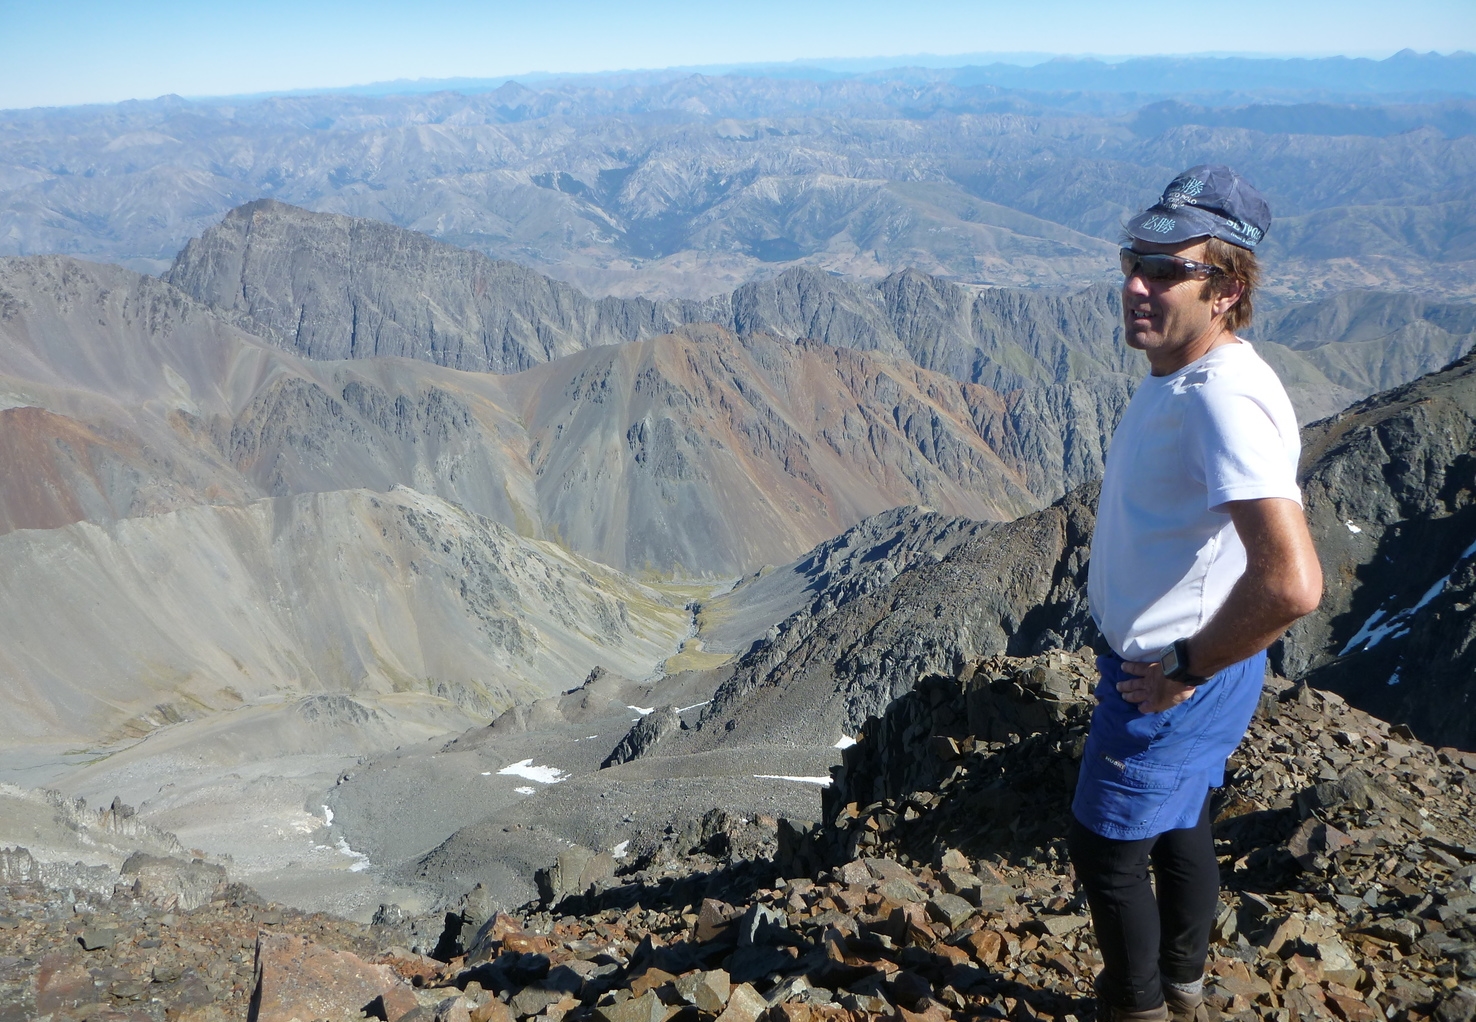   on the summit of Tapuae-o-Uenuku in mid-summer Jan 2015  